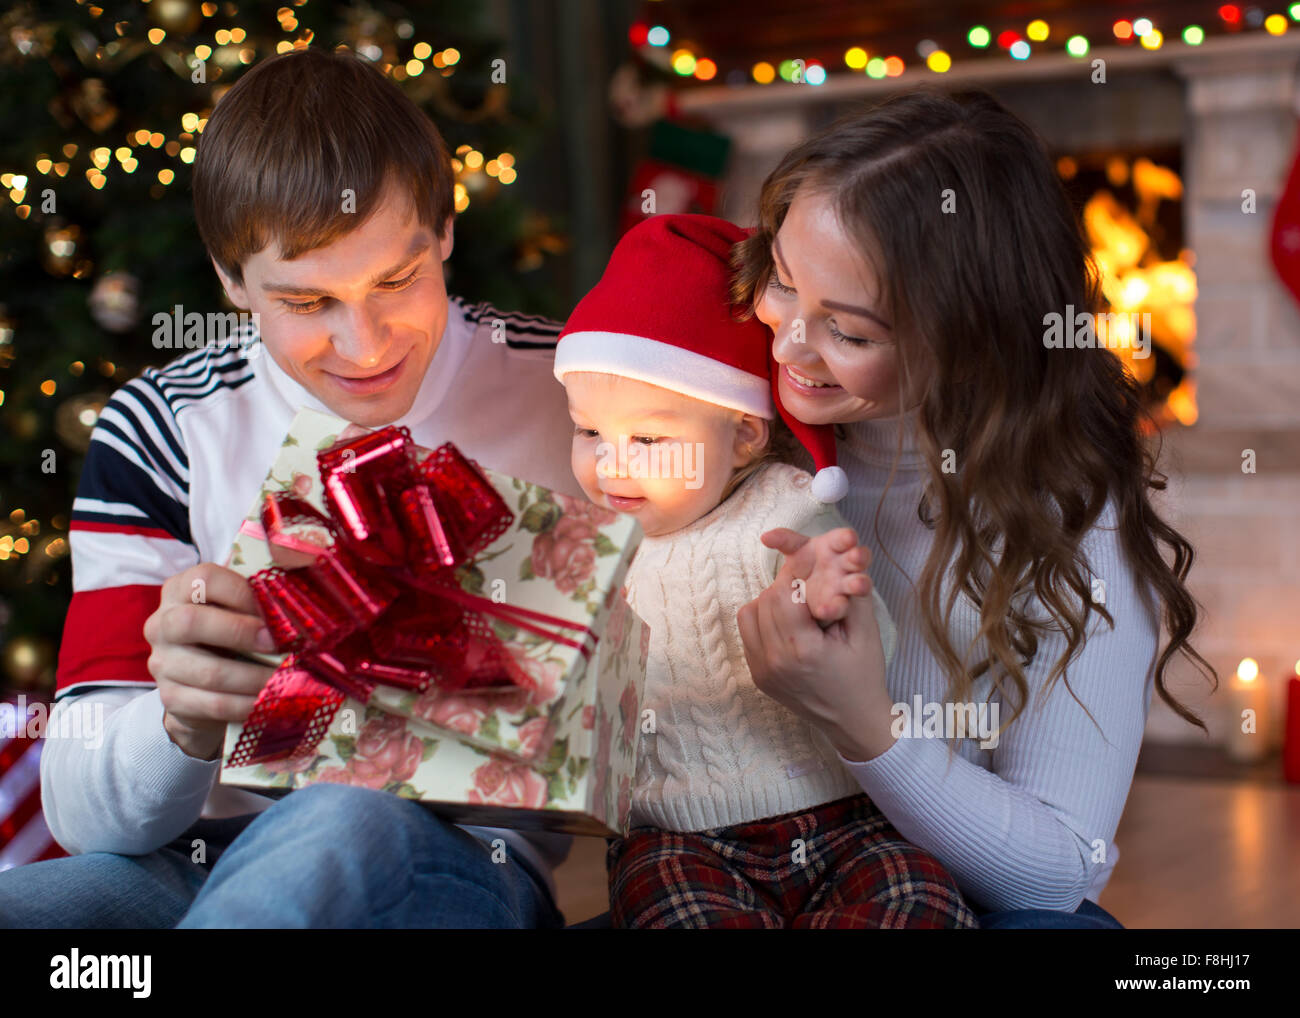 Opening gifts on Christmas and New Year Stock Photo